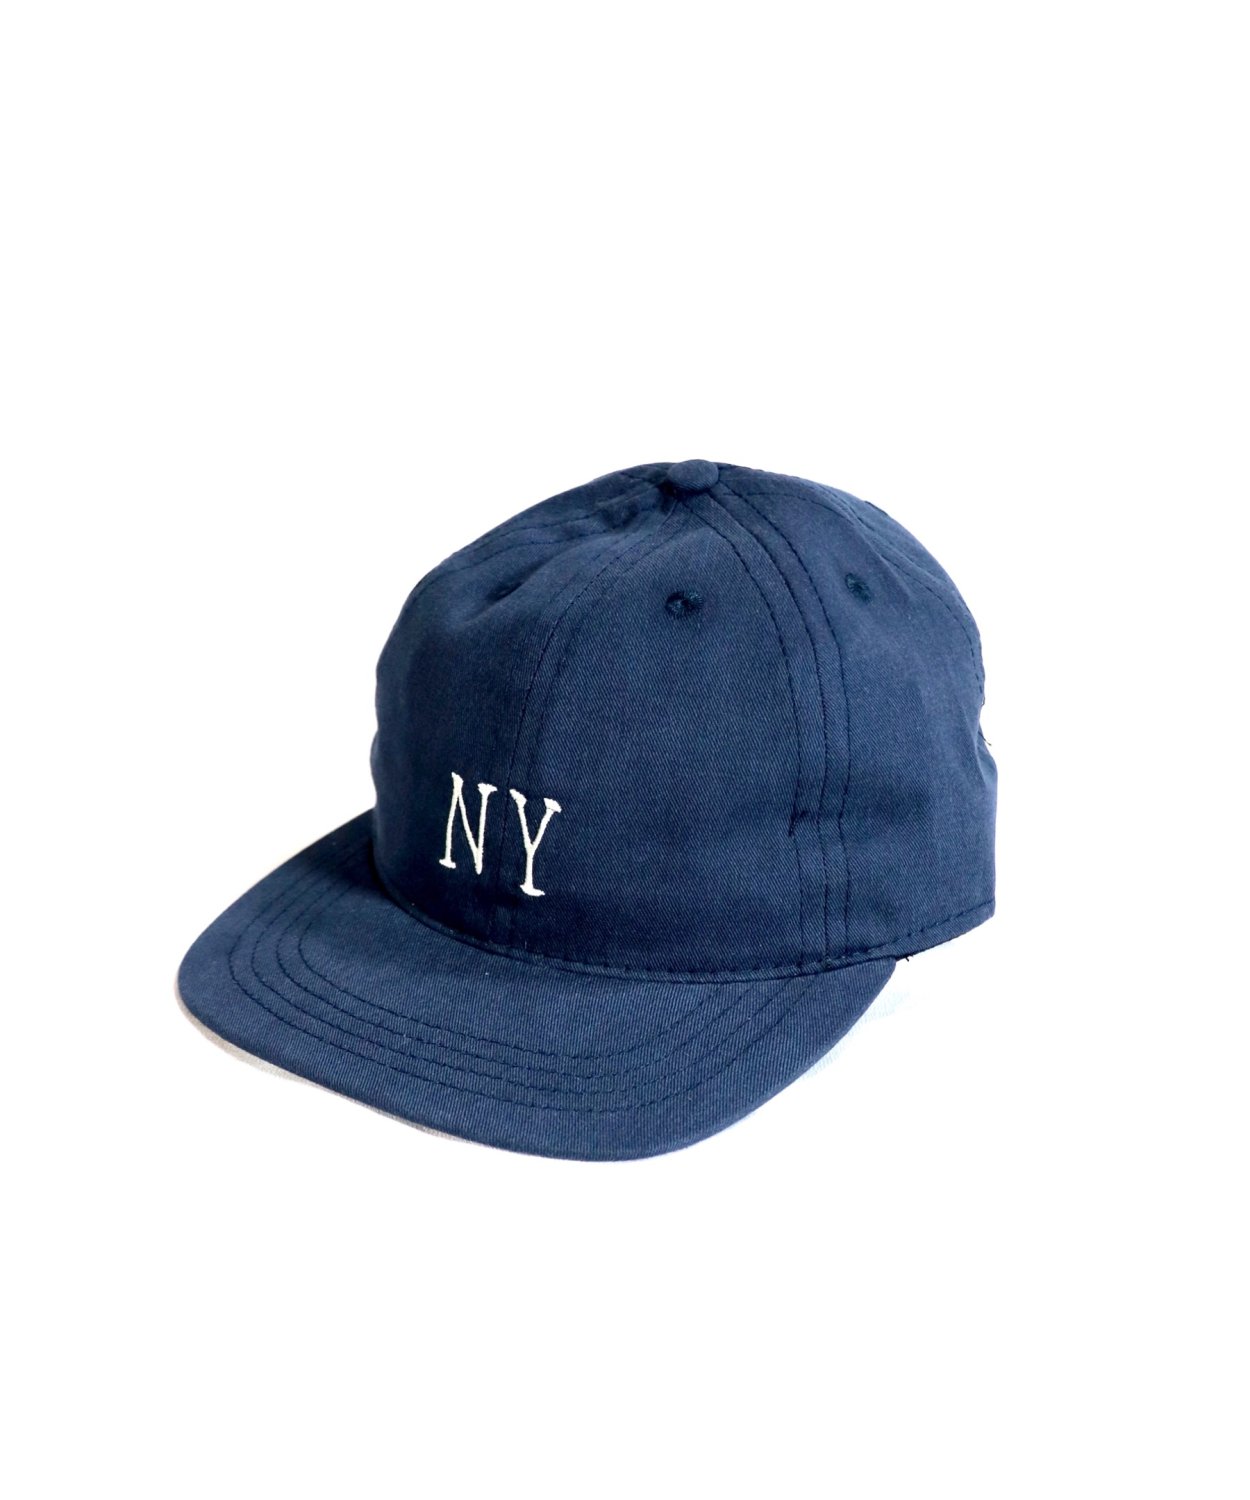 COOPERS TOWN BALL CAP / DAD CAP SMALL LOGO NY